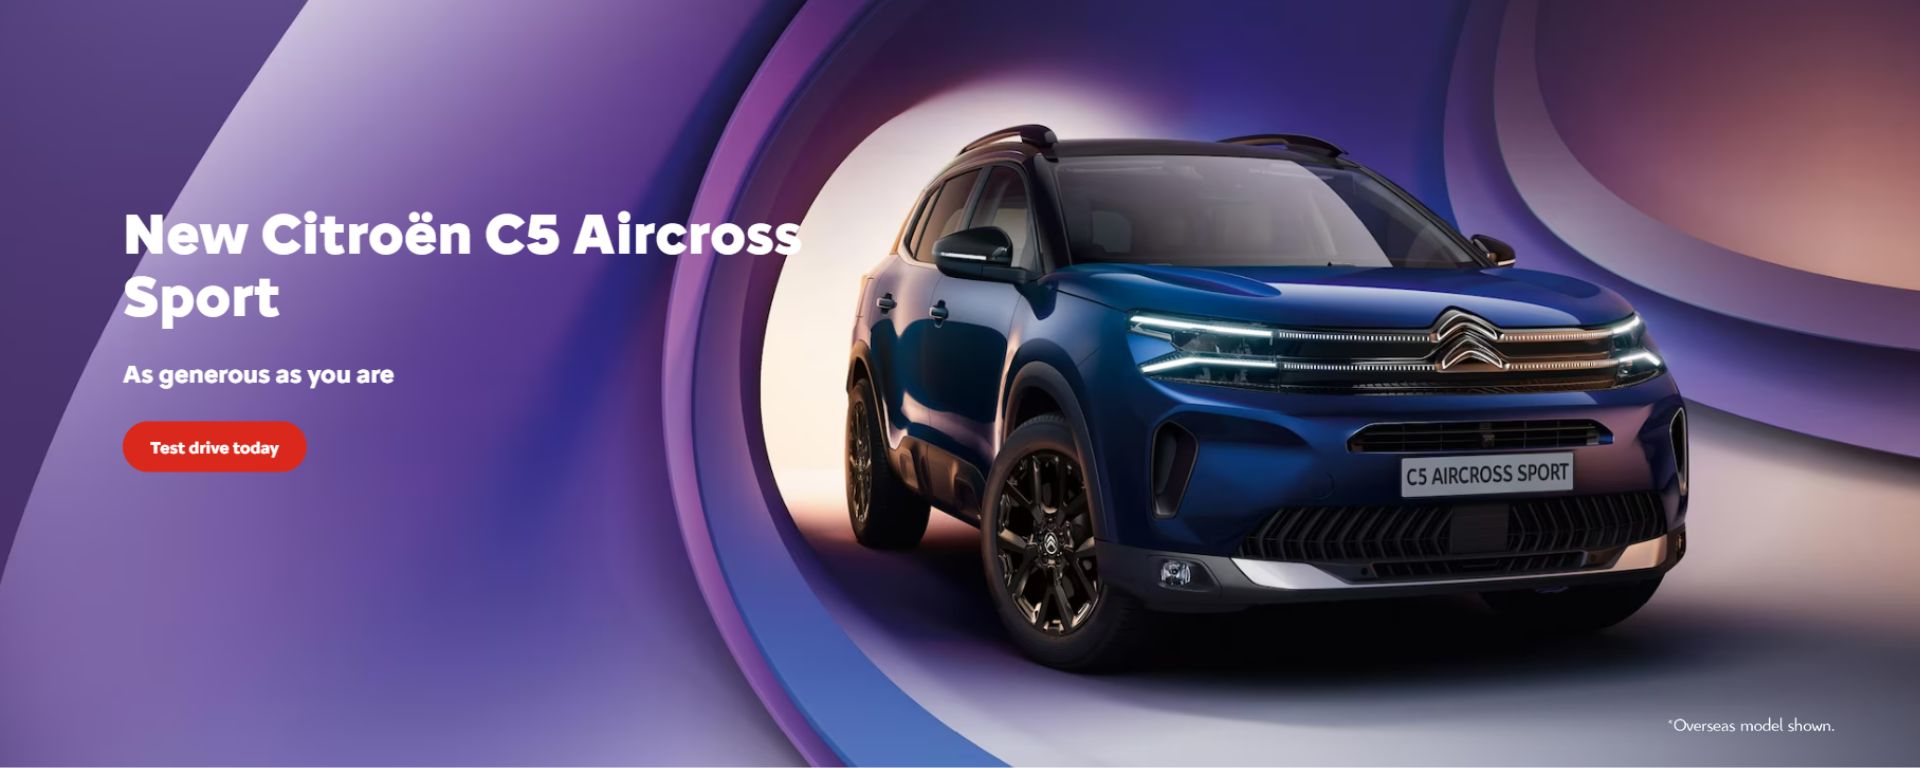 New Citroen C5 Aircross Sport - As generous as you are